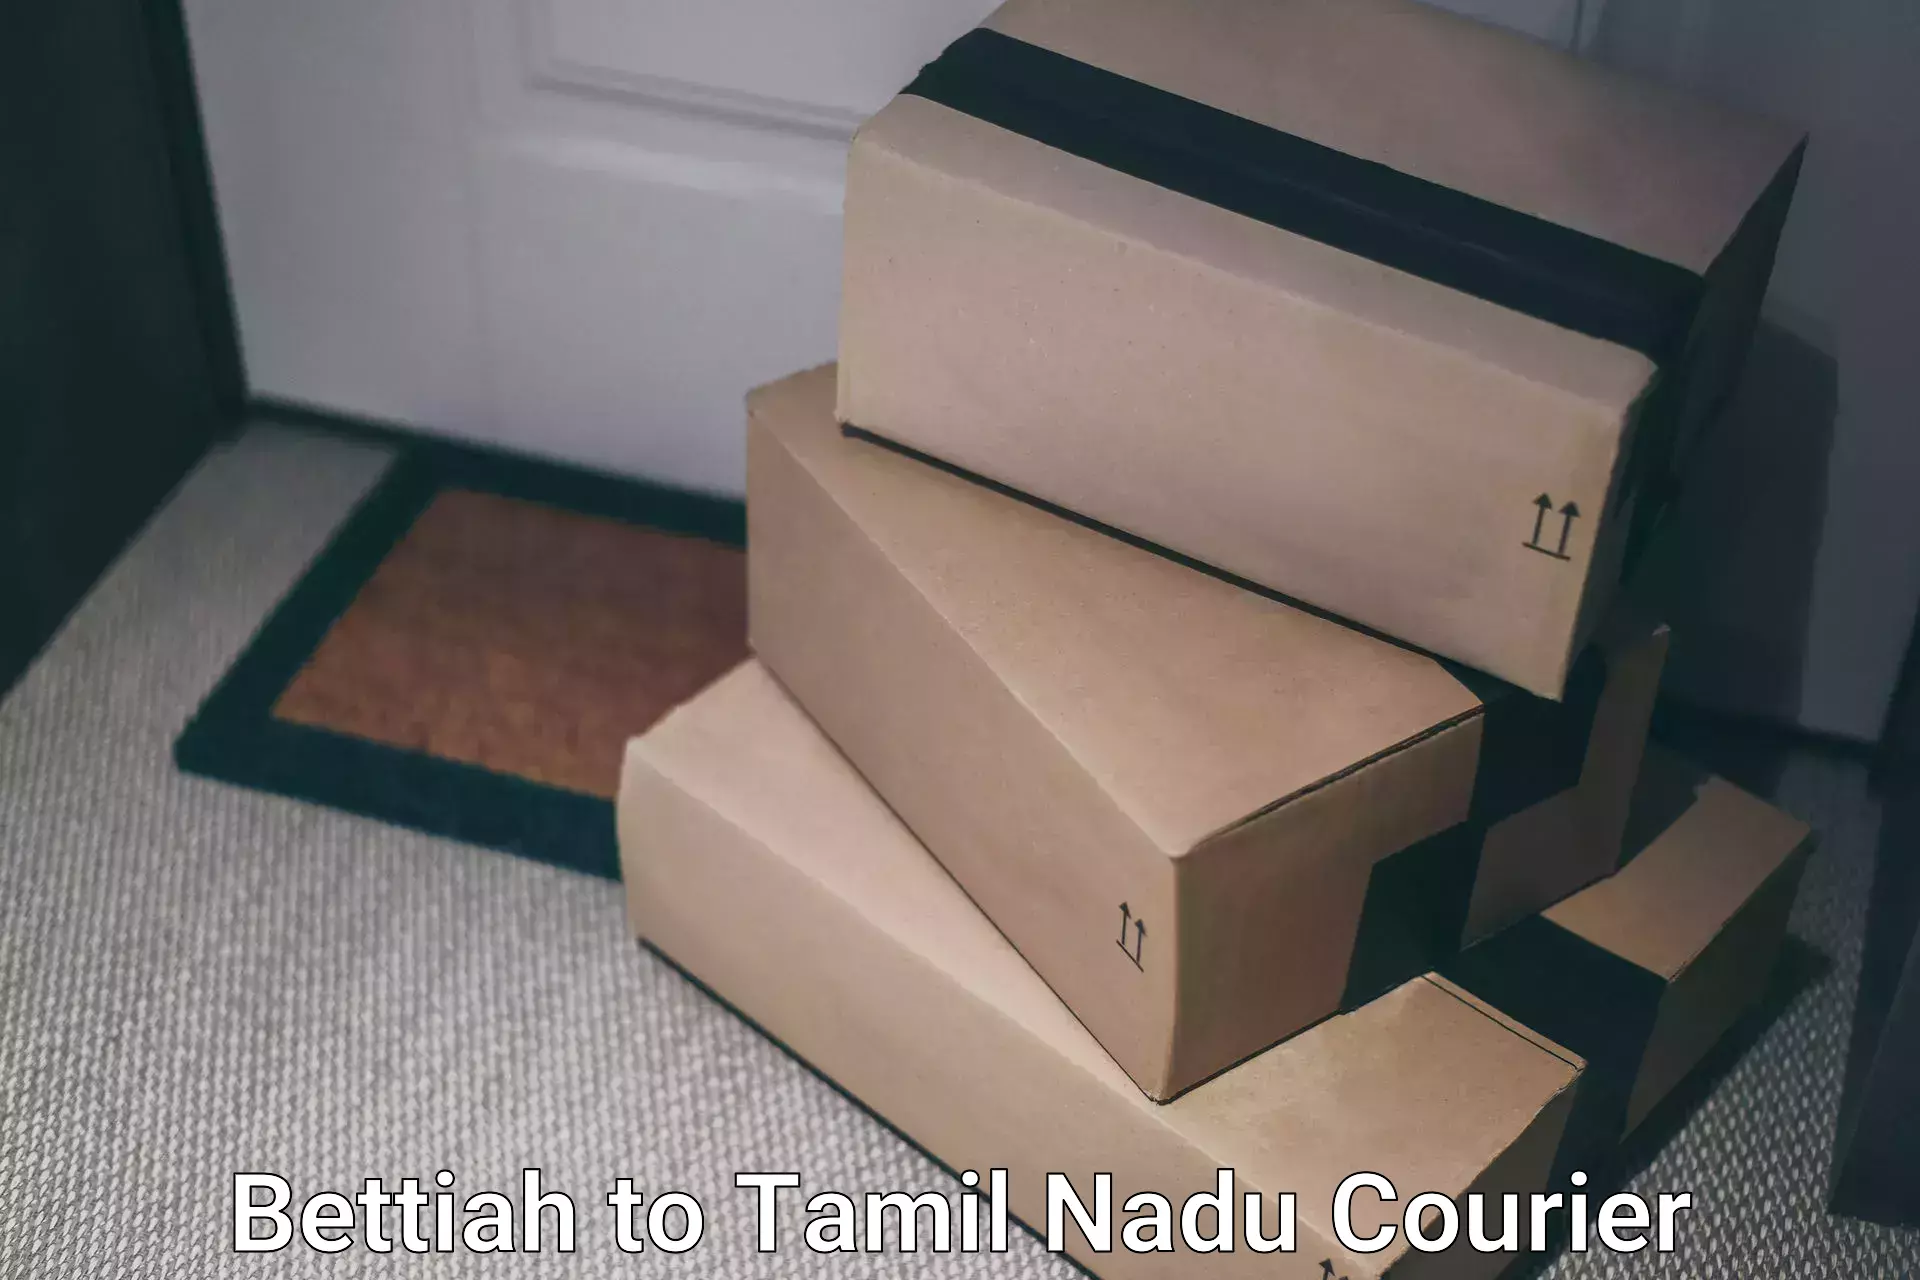 24-hour courier services in Bettiah to Tamil Nadu Agricultural University Coimbatore